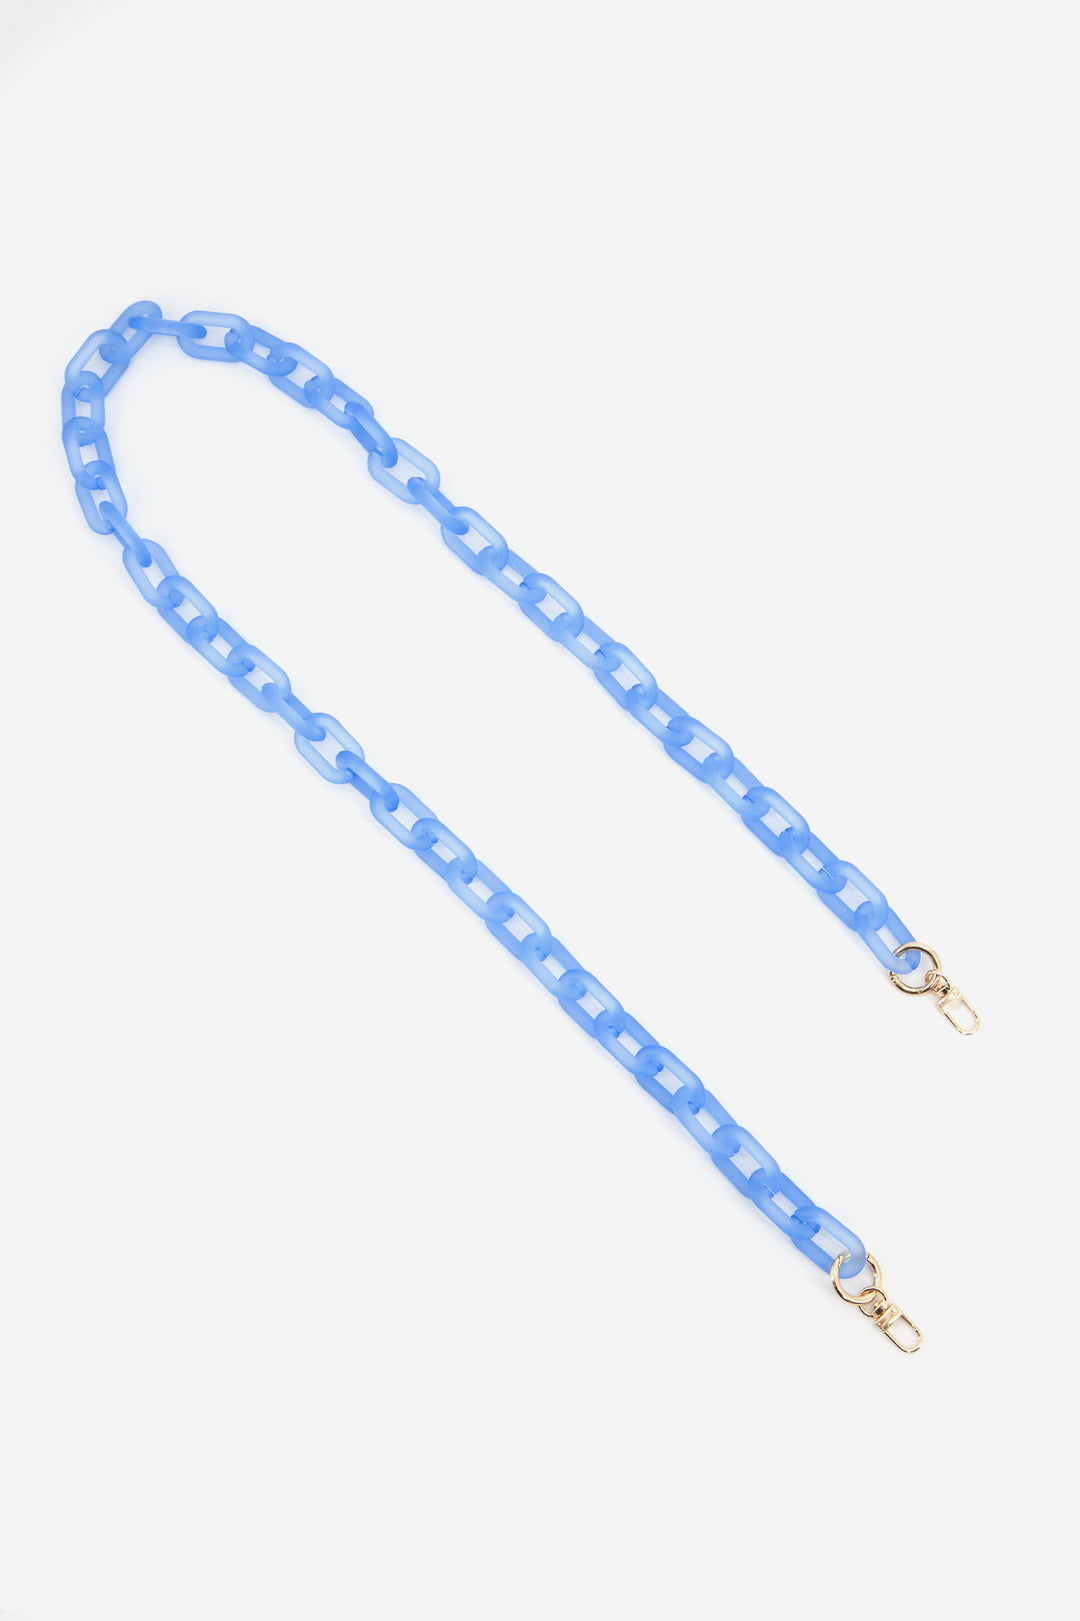 blue chain link acrylic bag strap with gold clip on attachments